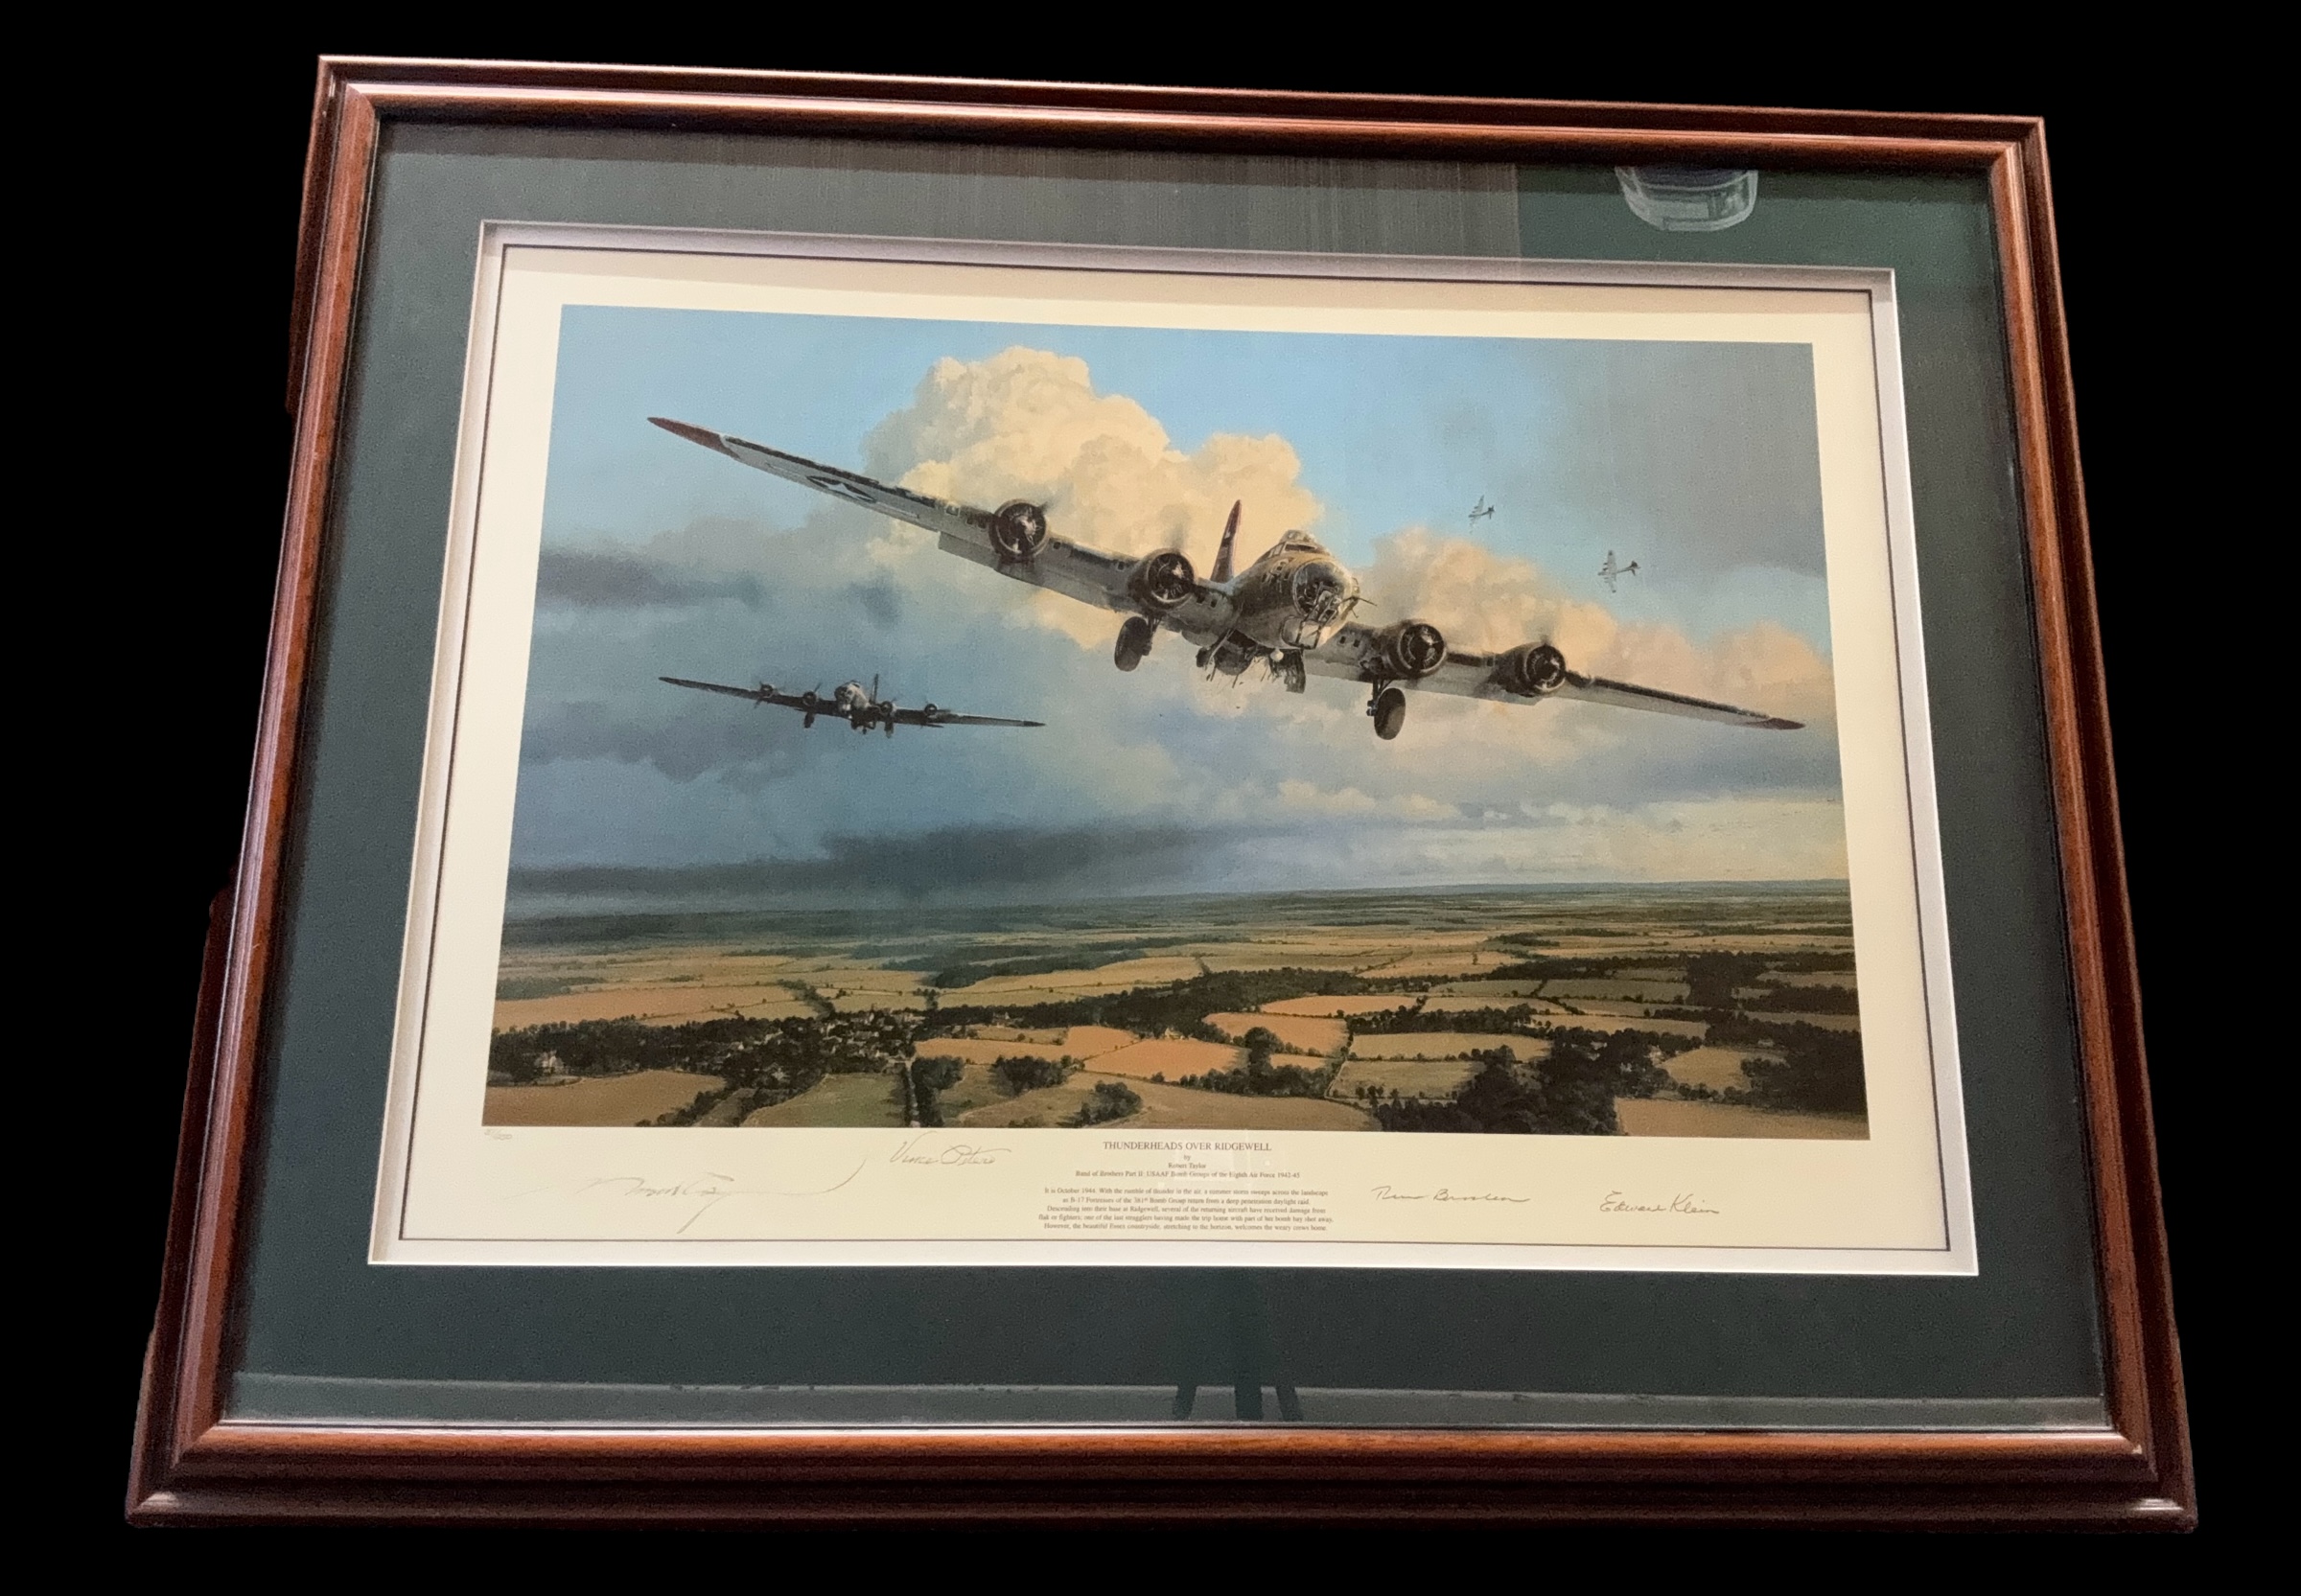 Thunderheads Over Ridgewell WWII multi signed 36x28 inch framed and mounted print limited edition - Image 3 of 3